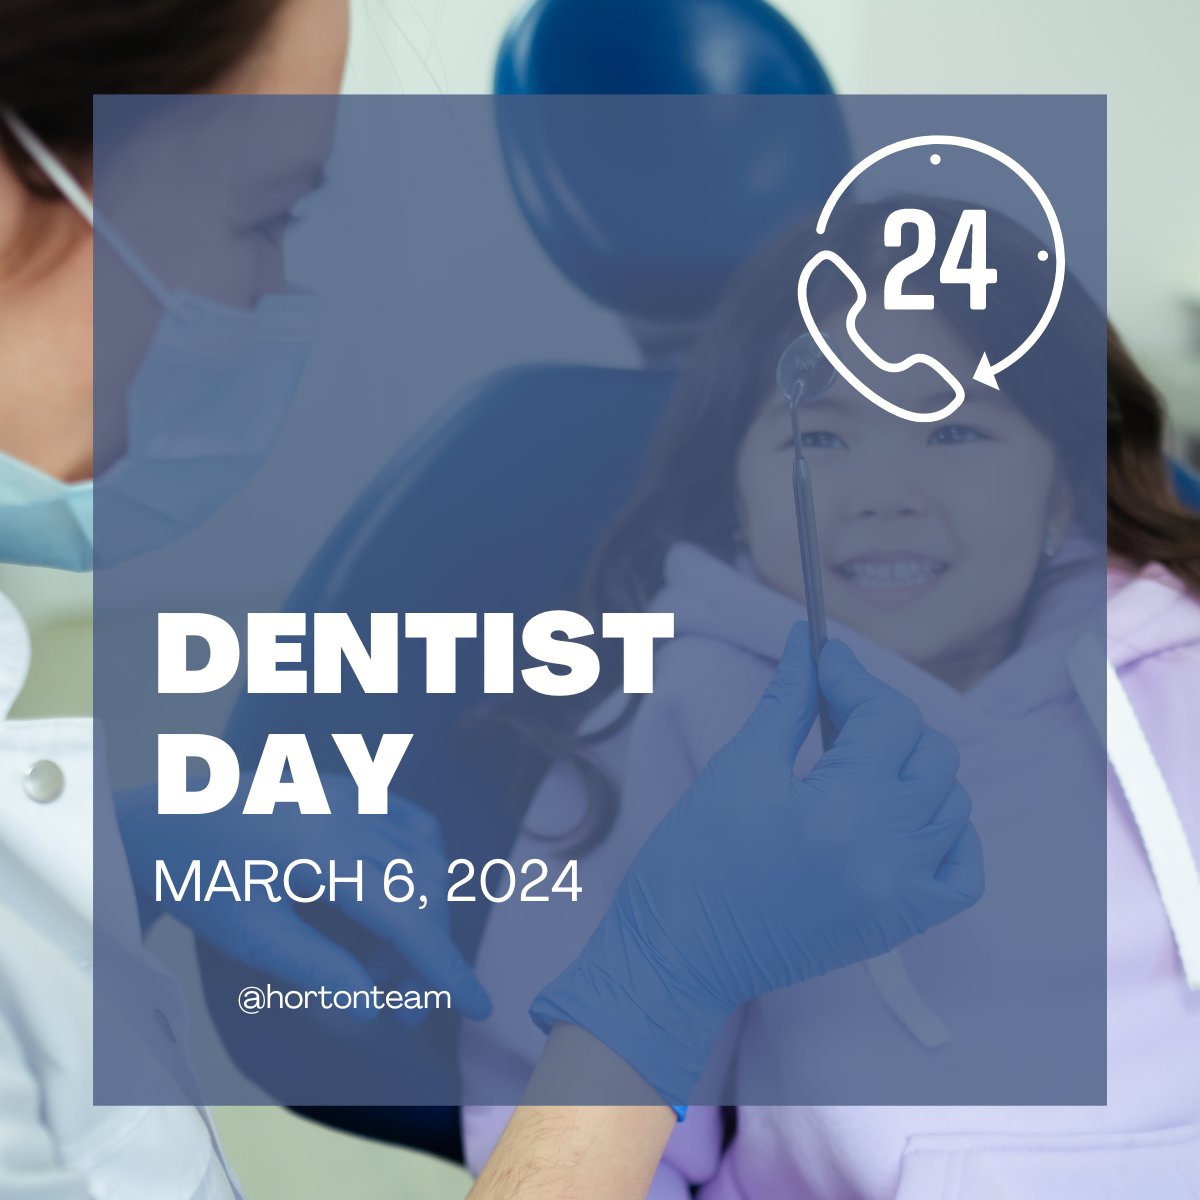 It's Dentist Day! Shoutout to all the dentists out there keeping our smiles in top shape. Whether you're sending a virtual thank you card or leaving a positive review, let's show some love to our tooth heroes! 😁

#DentistDay #SmileSquad